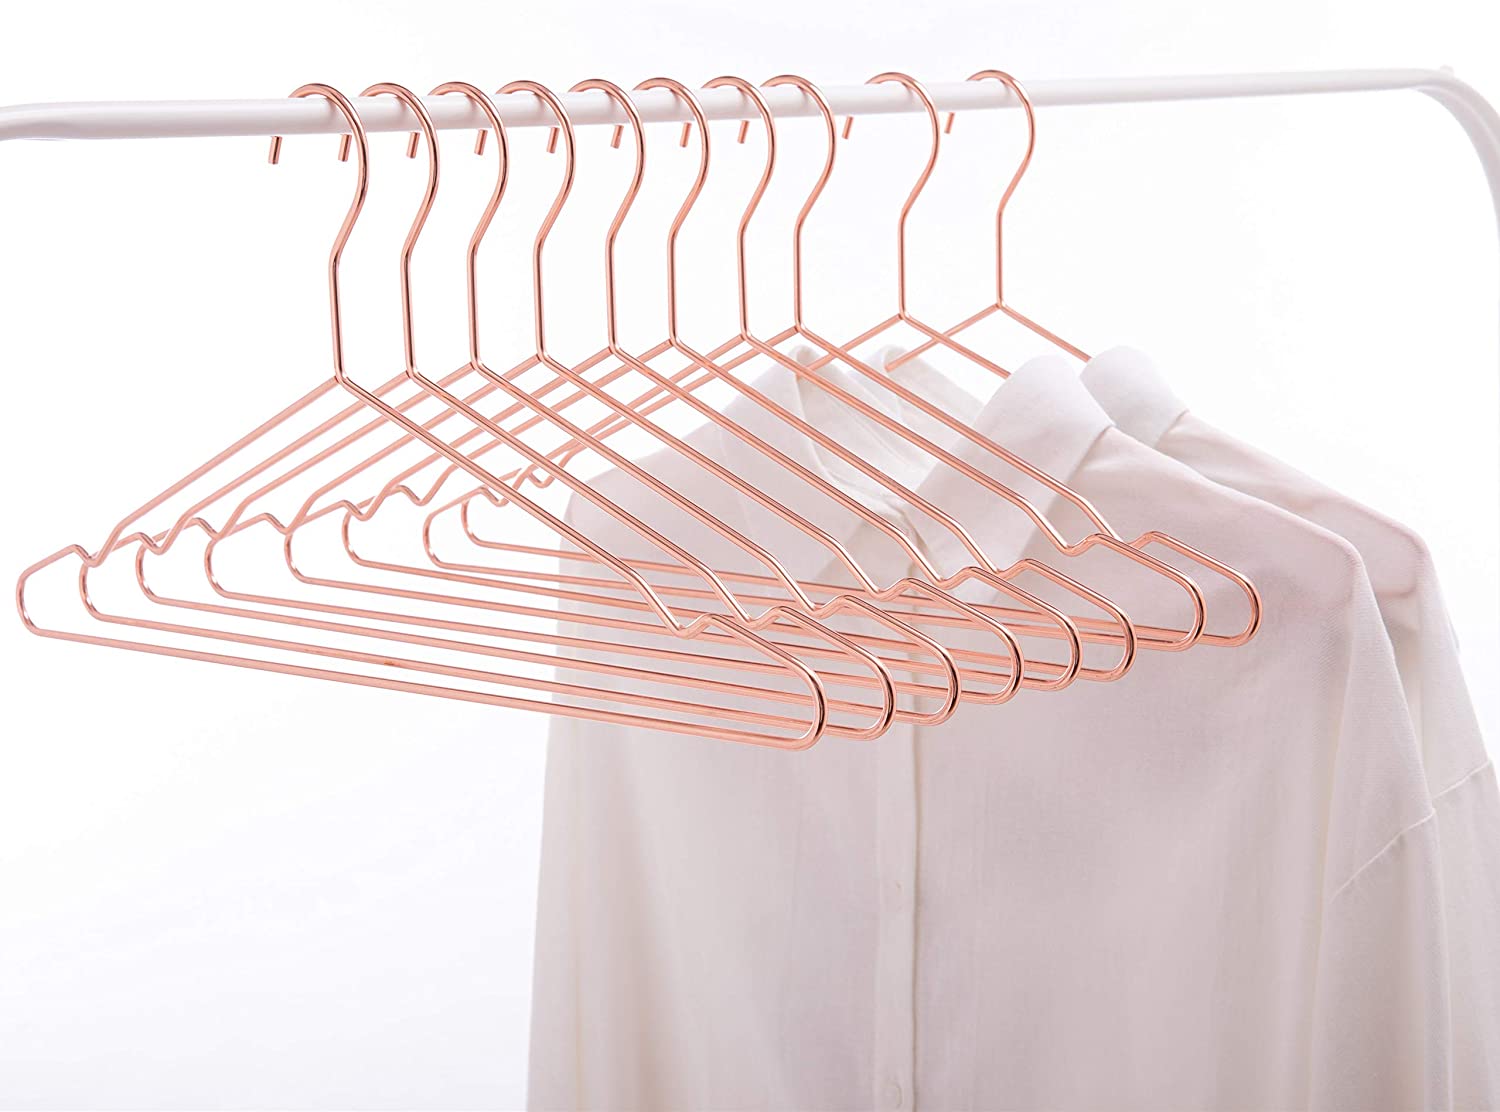 Rose Gold Metal Hanger Rack With Notches